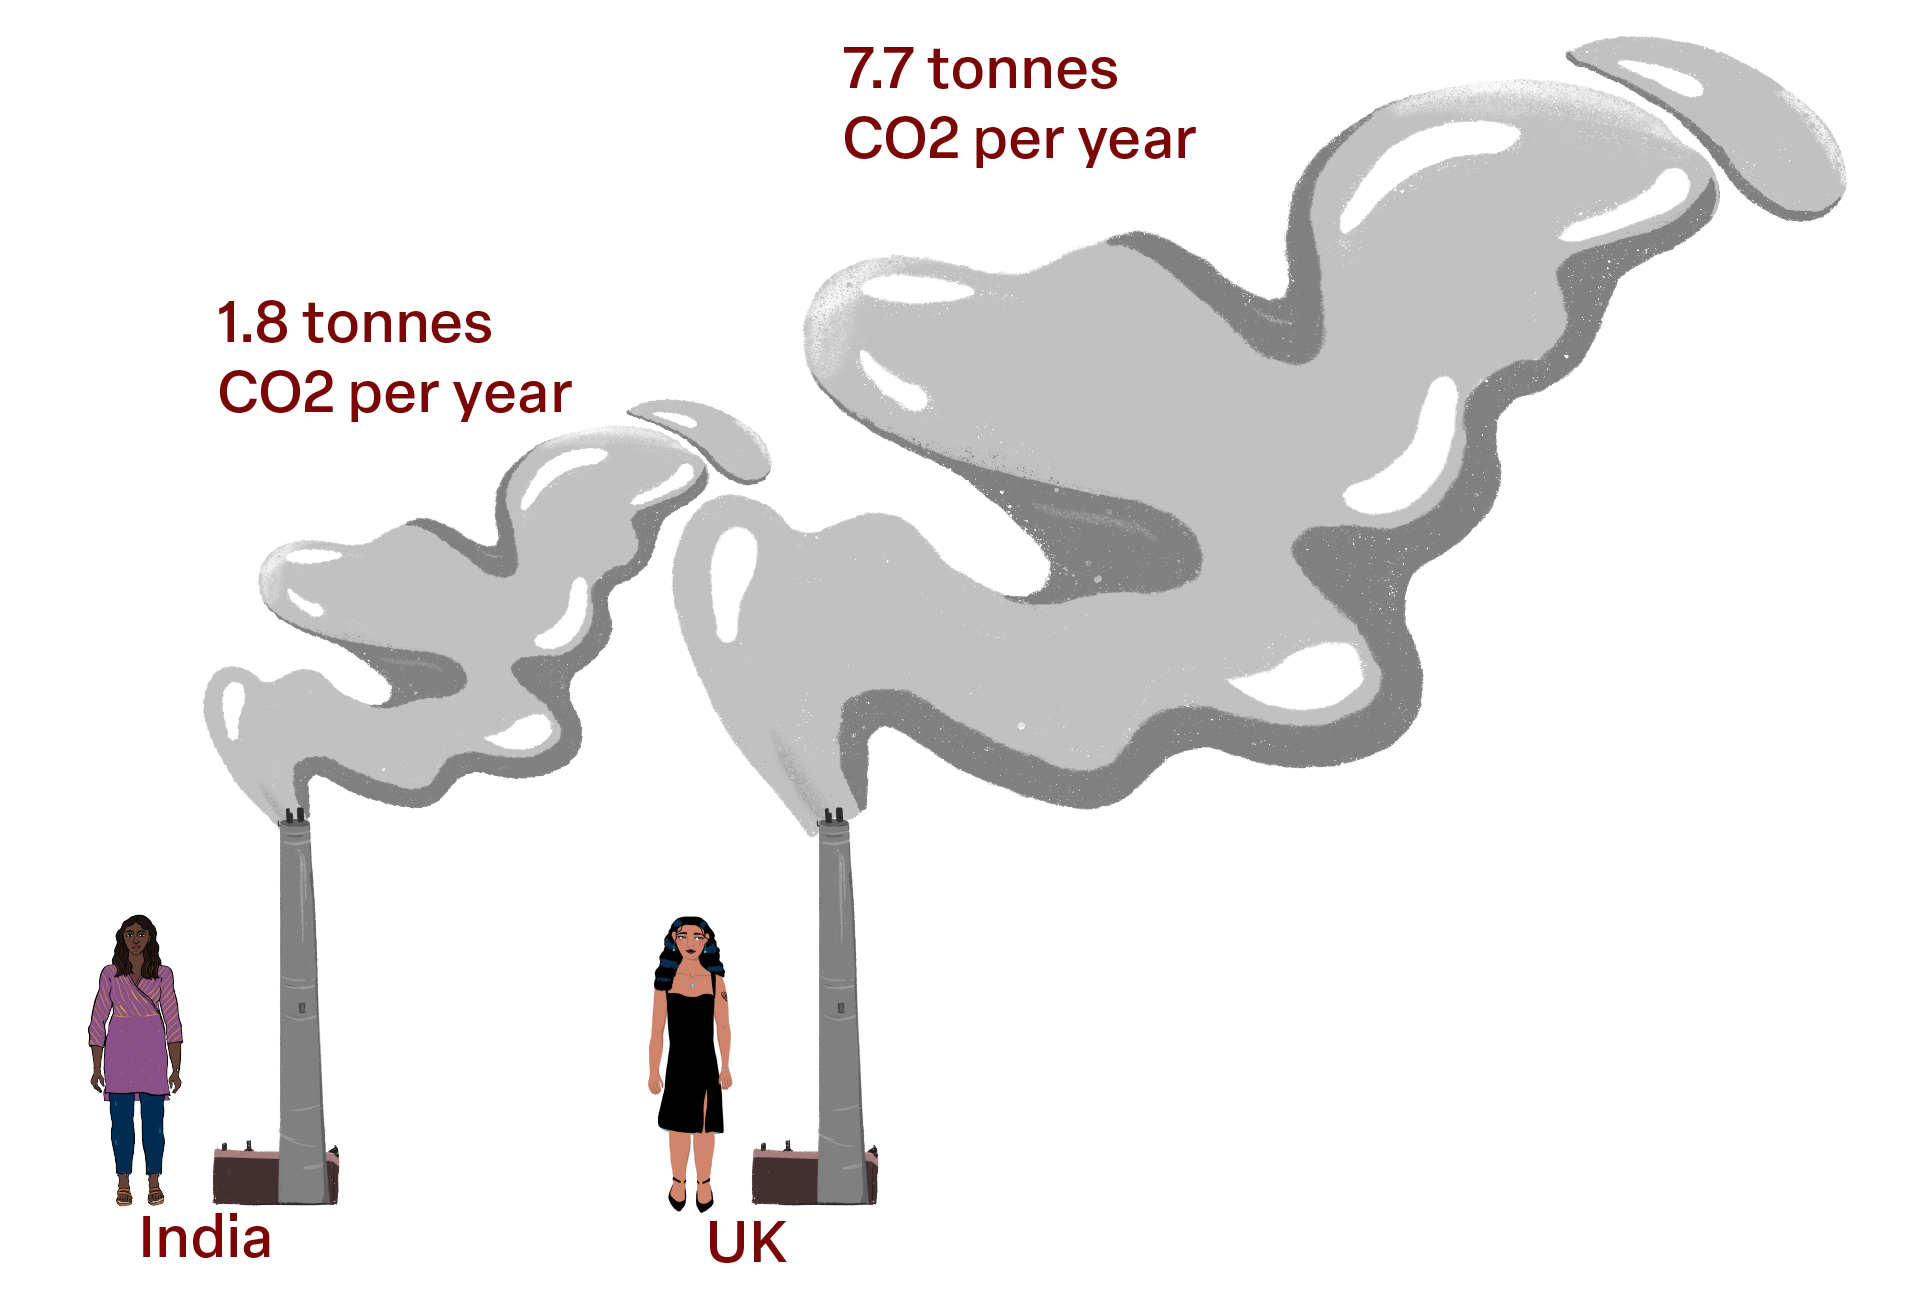 Illustration of a person in India with a small cloud of smoke coming out of a chimney. And a person in the UK with a bigger cloud of smoke coming out of a chimney. For India, carbon dioxide emissions per year is 1.8 tonnes per person. For the UK, carbon dioxide emissions per year is 7.7 tonnes per person.